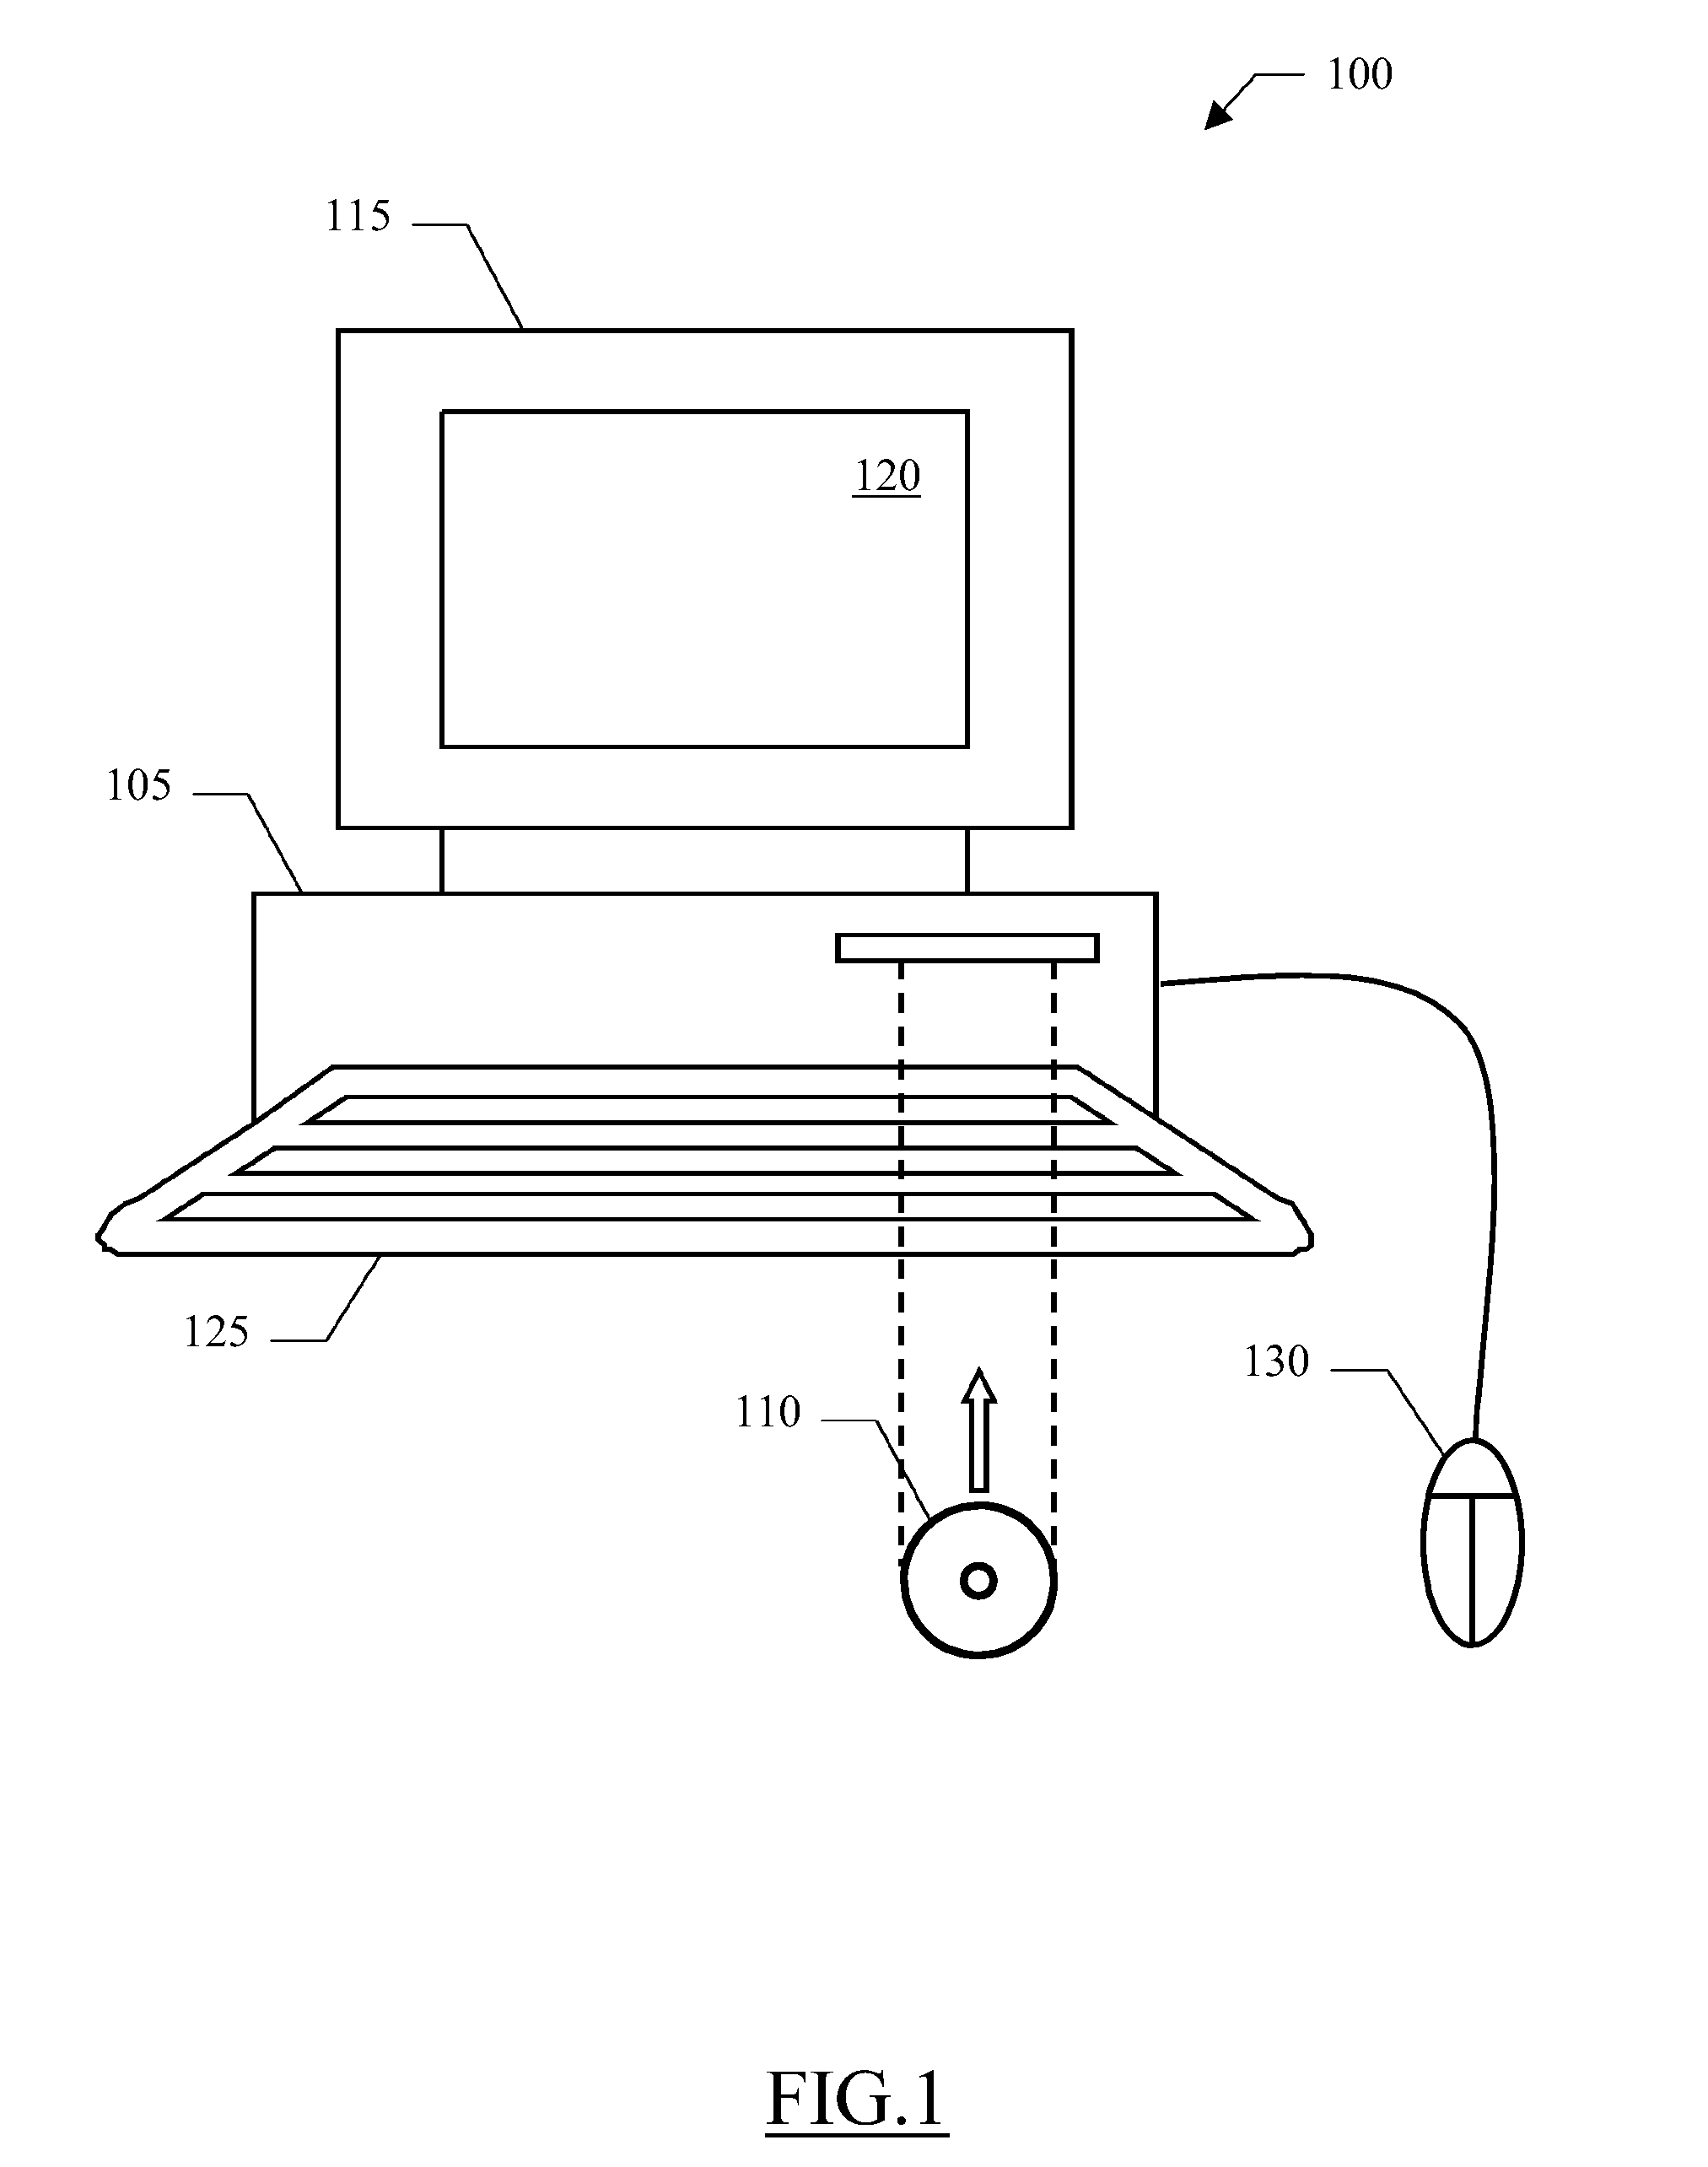 Method, system and computer program for testing a command line interface of a software product